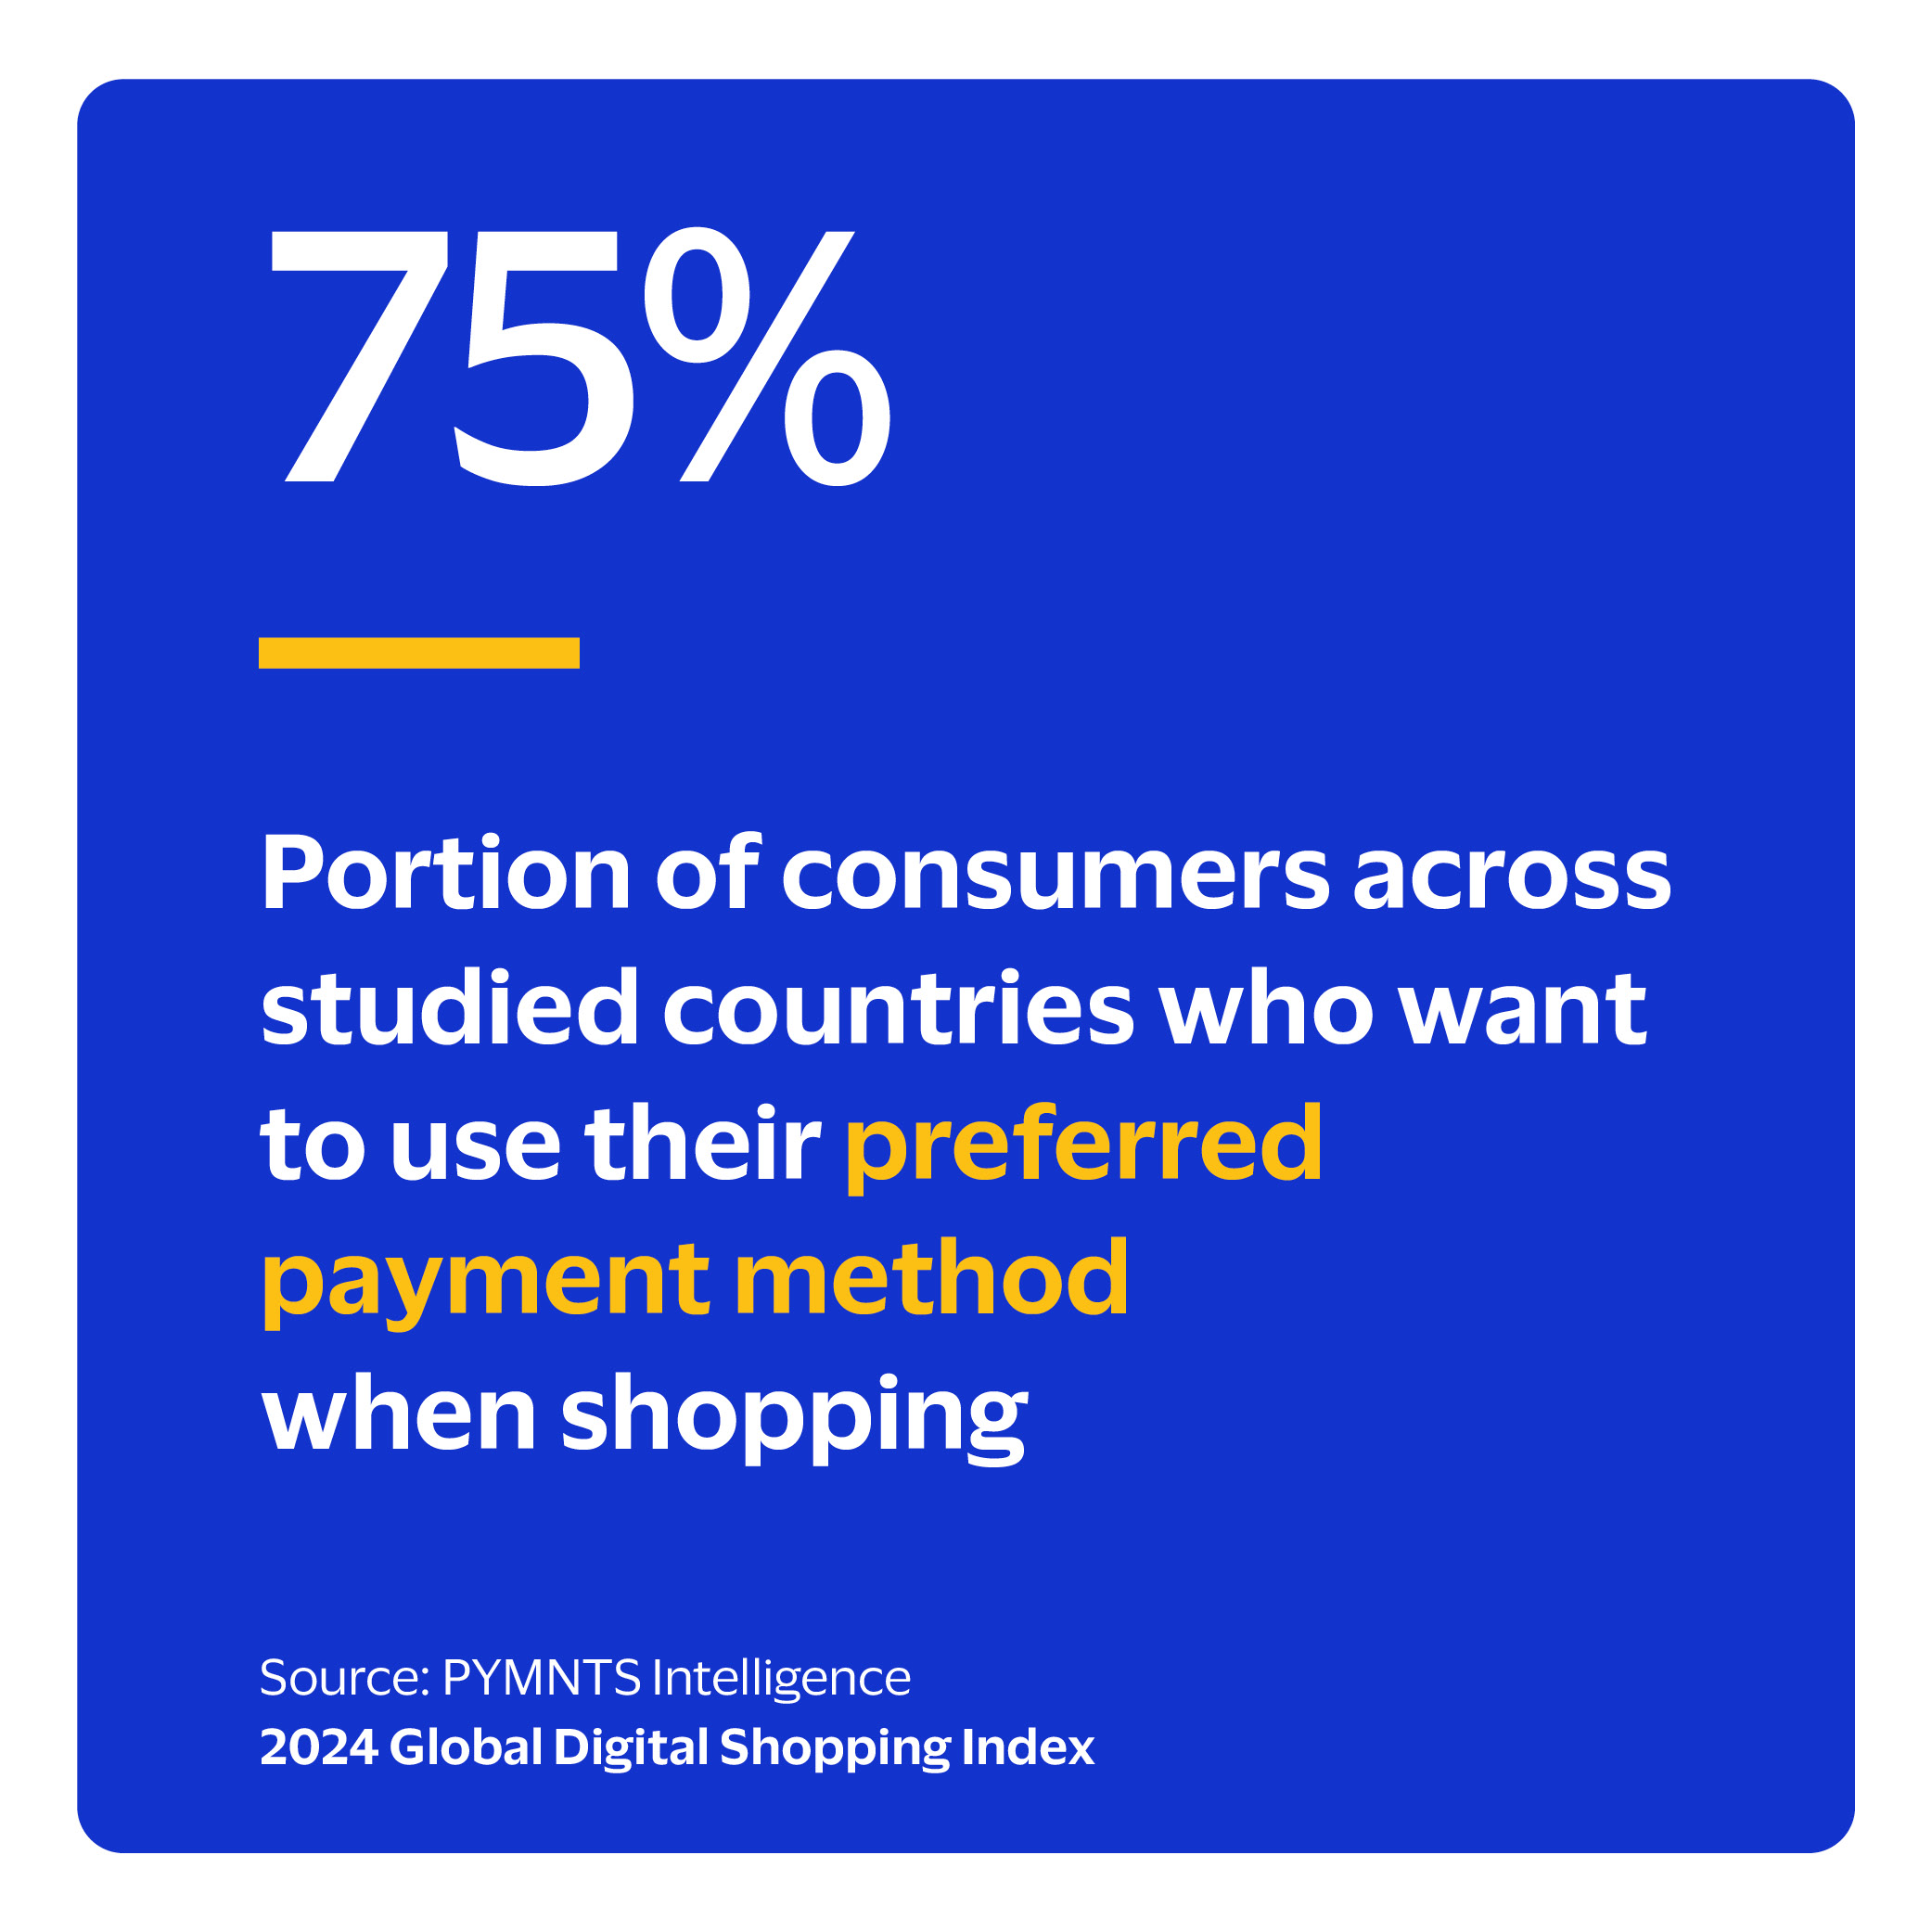 75%: Portion of consumers across studied countries who want to use their preferred payment method when shopping